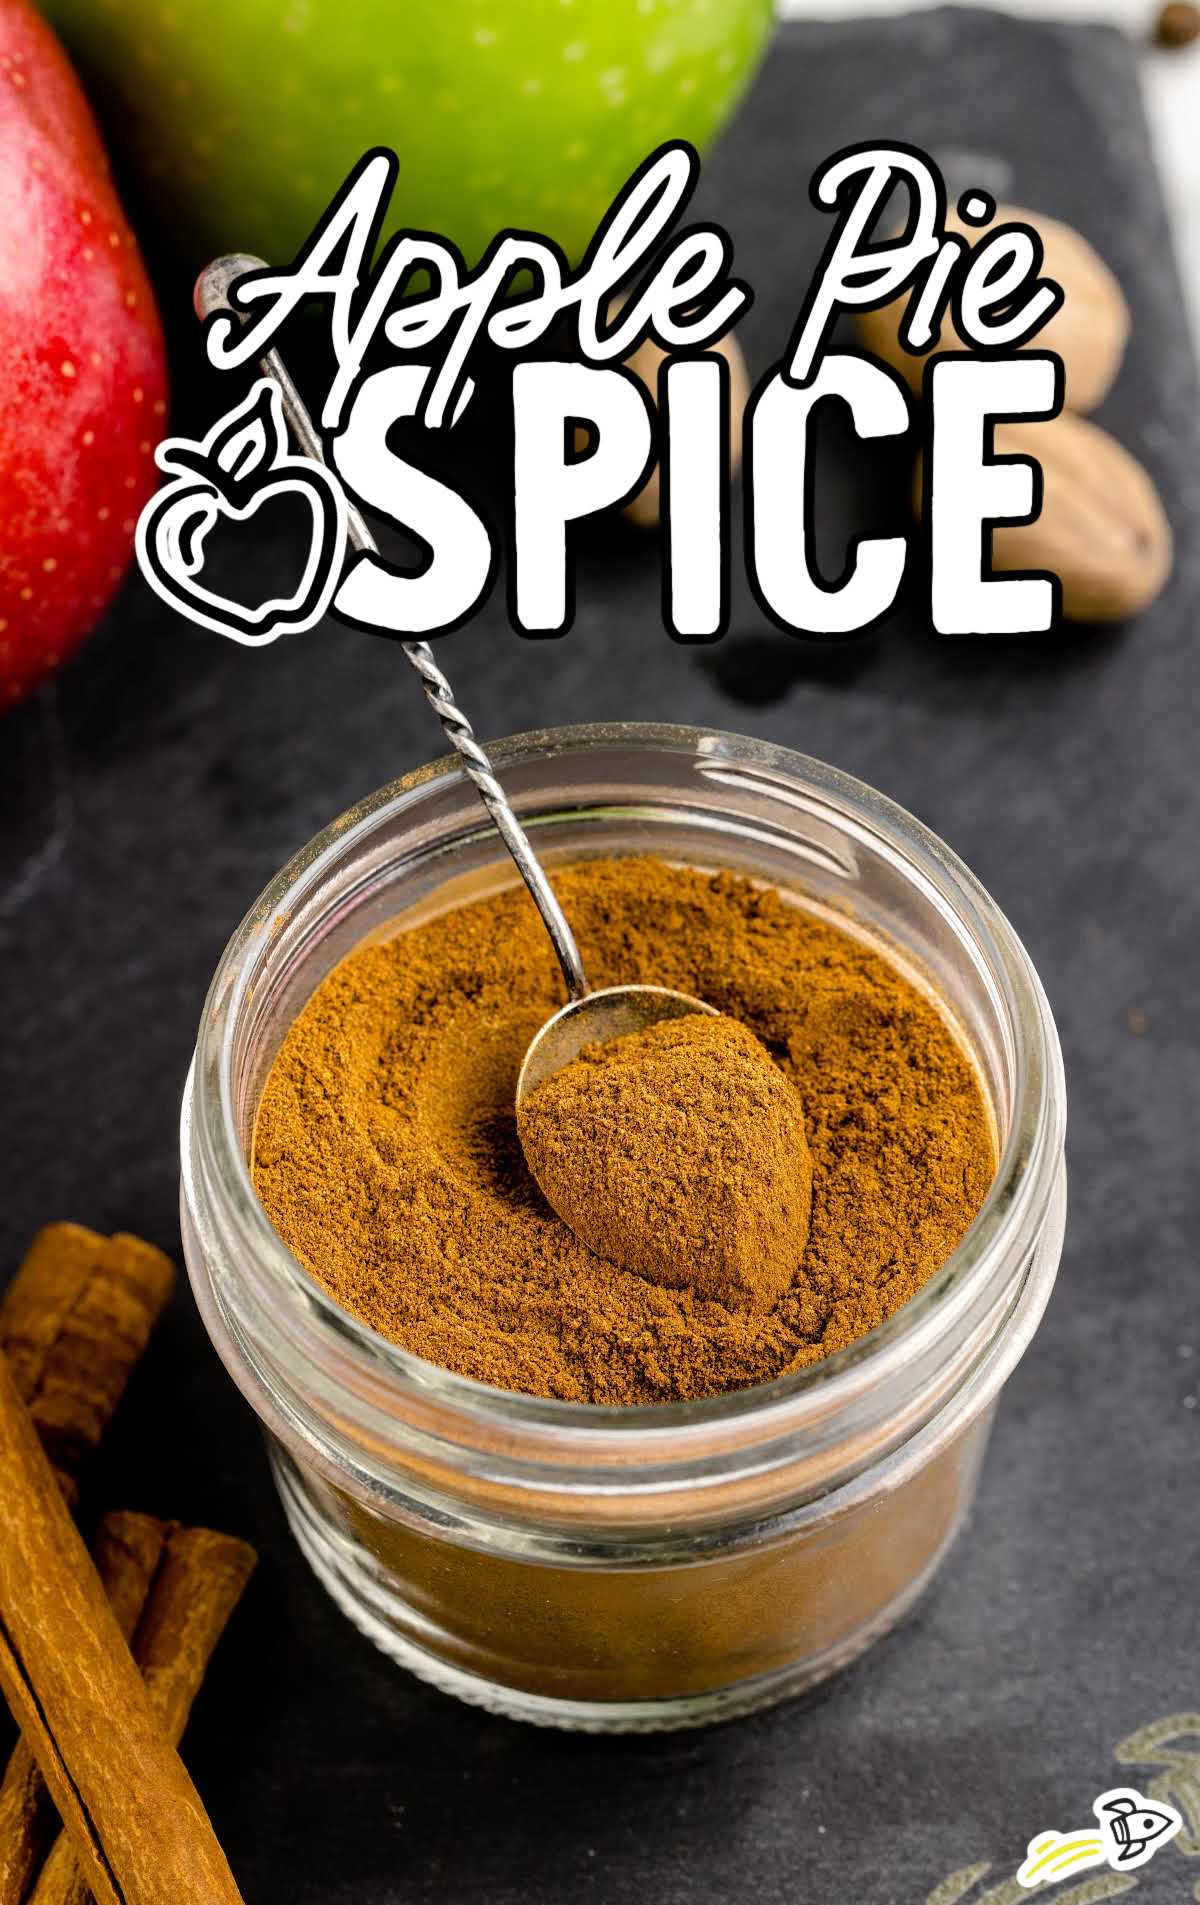 close up shot of a jar of Apple Pie Spice with a spoon